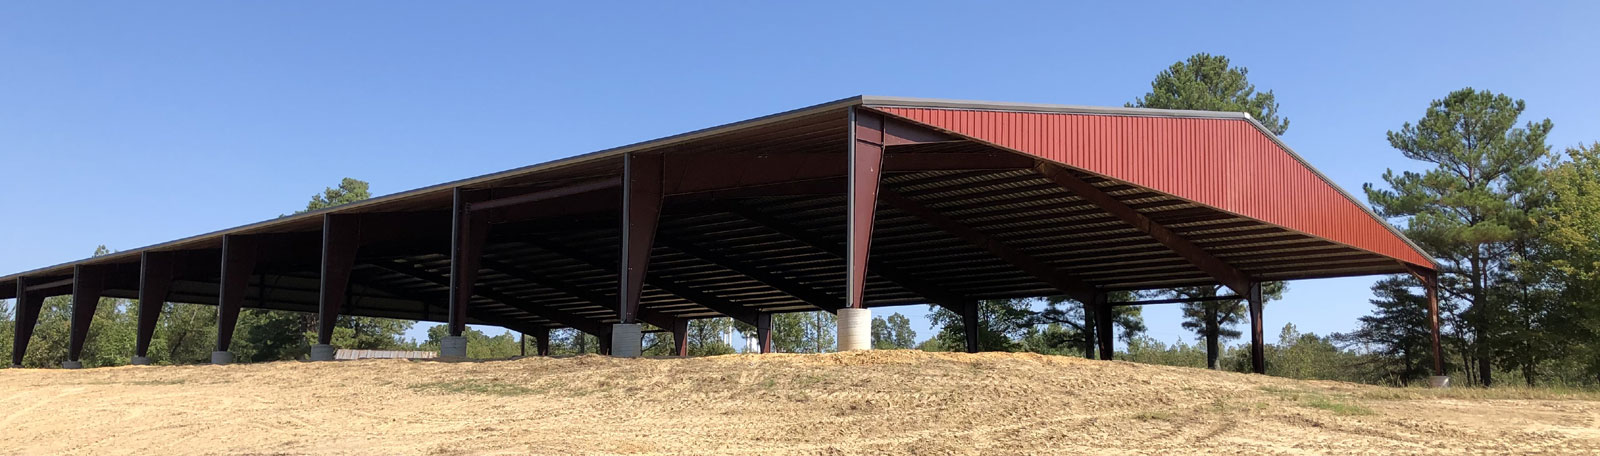 Covered Horse Riding Arena Construction